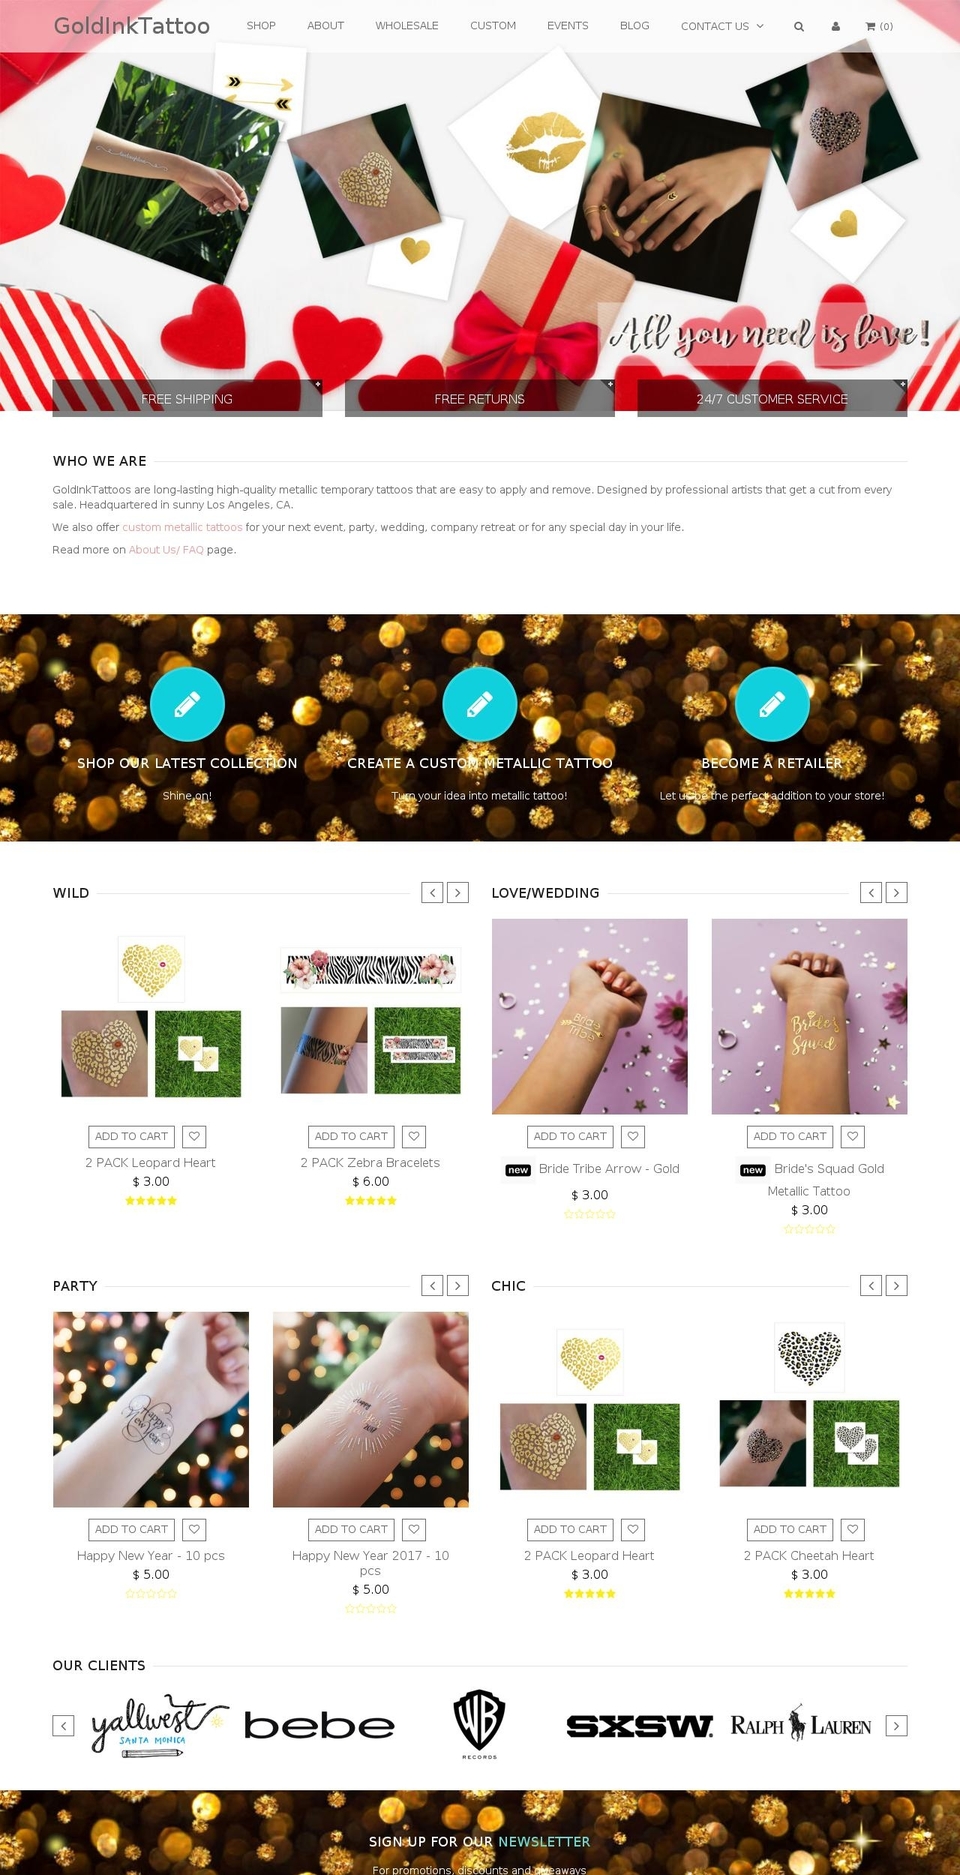 QUEEN Shopify theme site example goldinktattoo.com